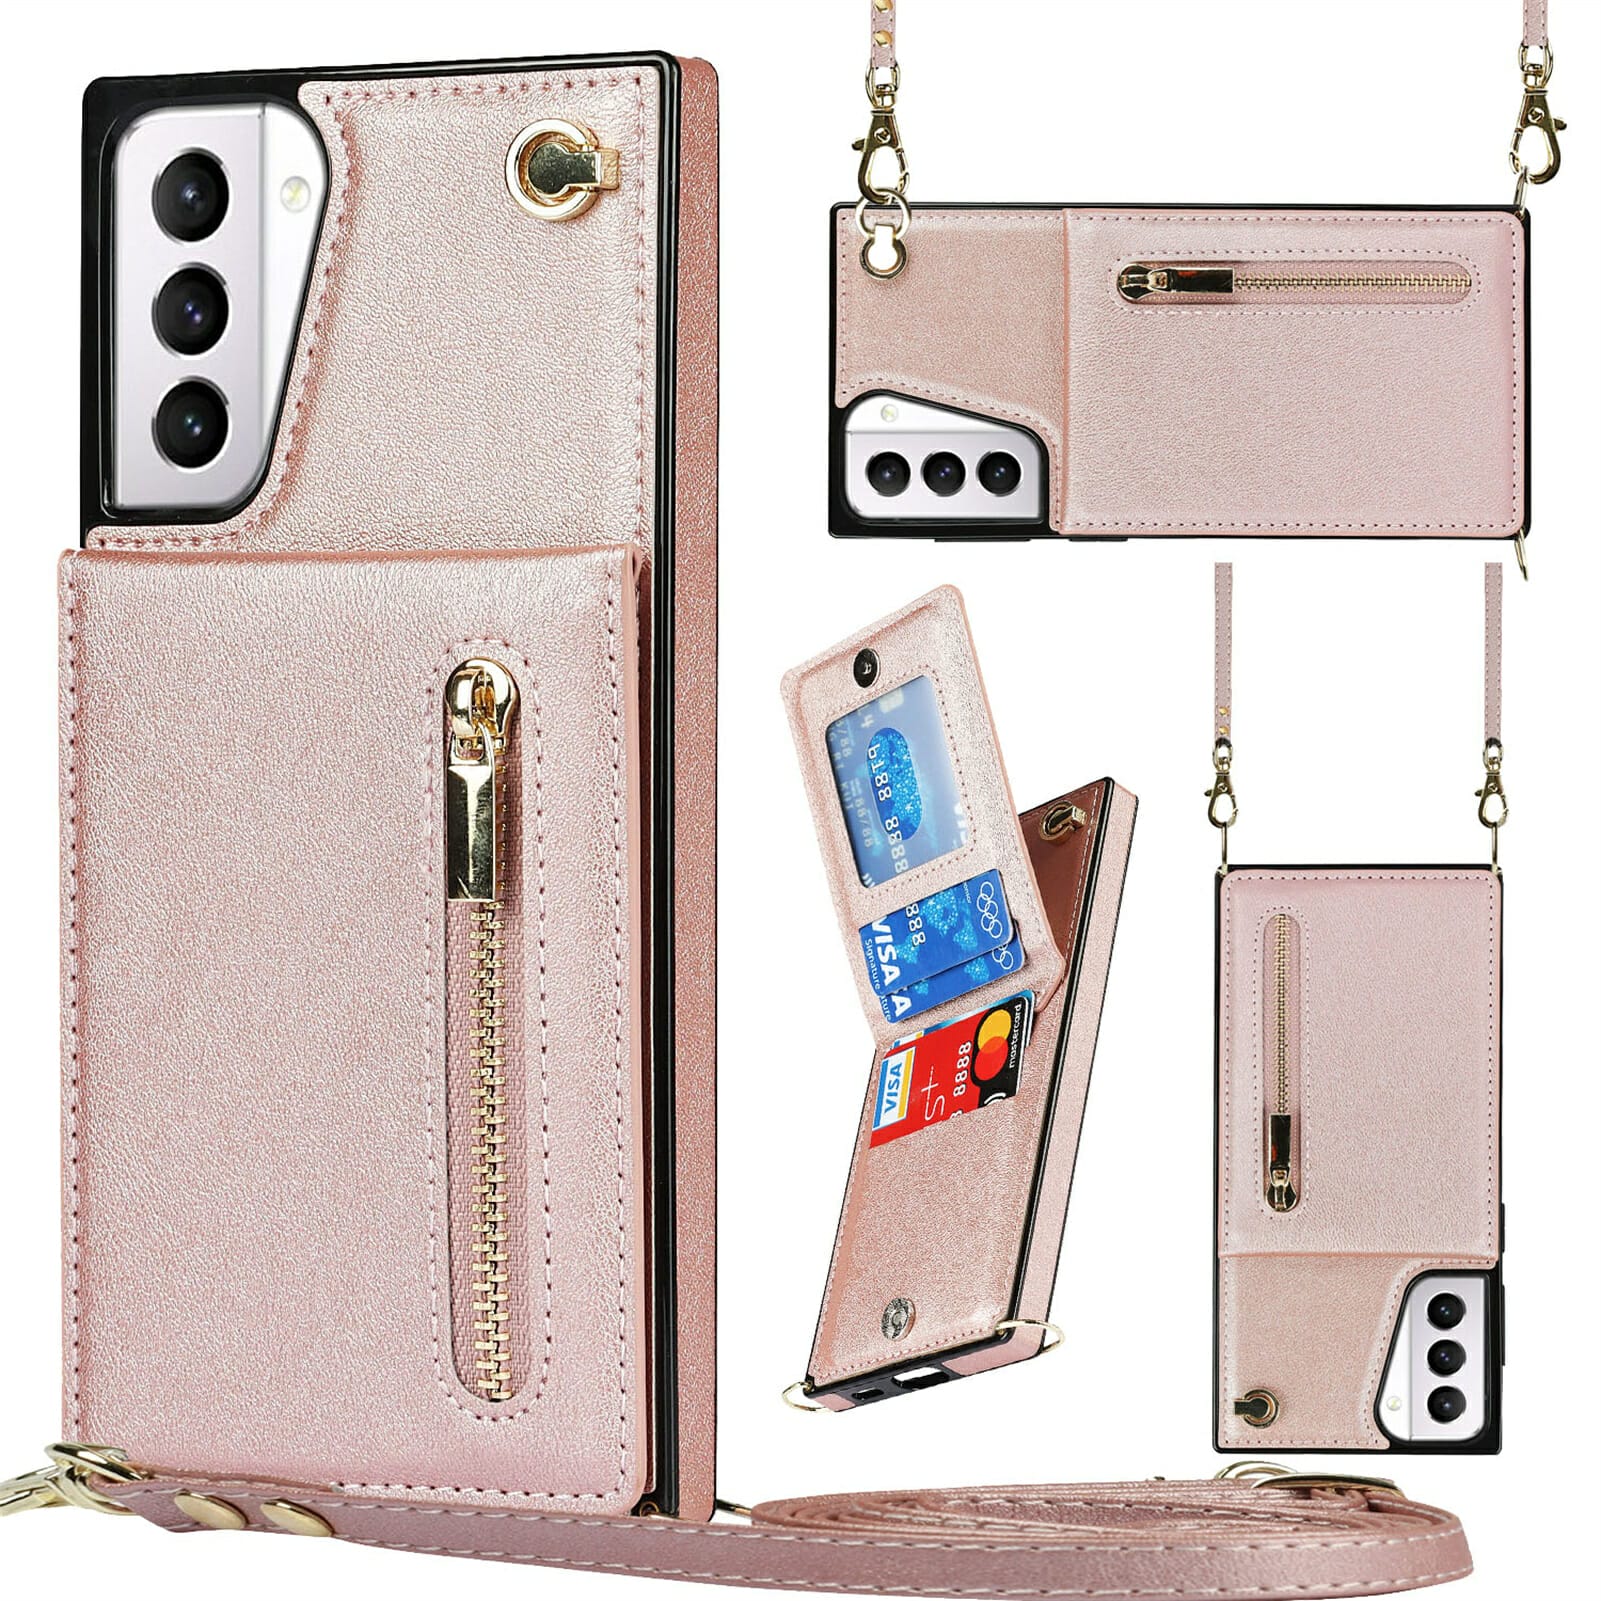 Leather Zipper Wallet Cross Body Case for Samsung Galaxy S and Note Series 3